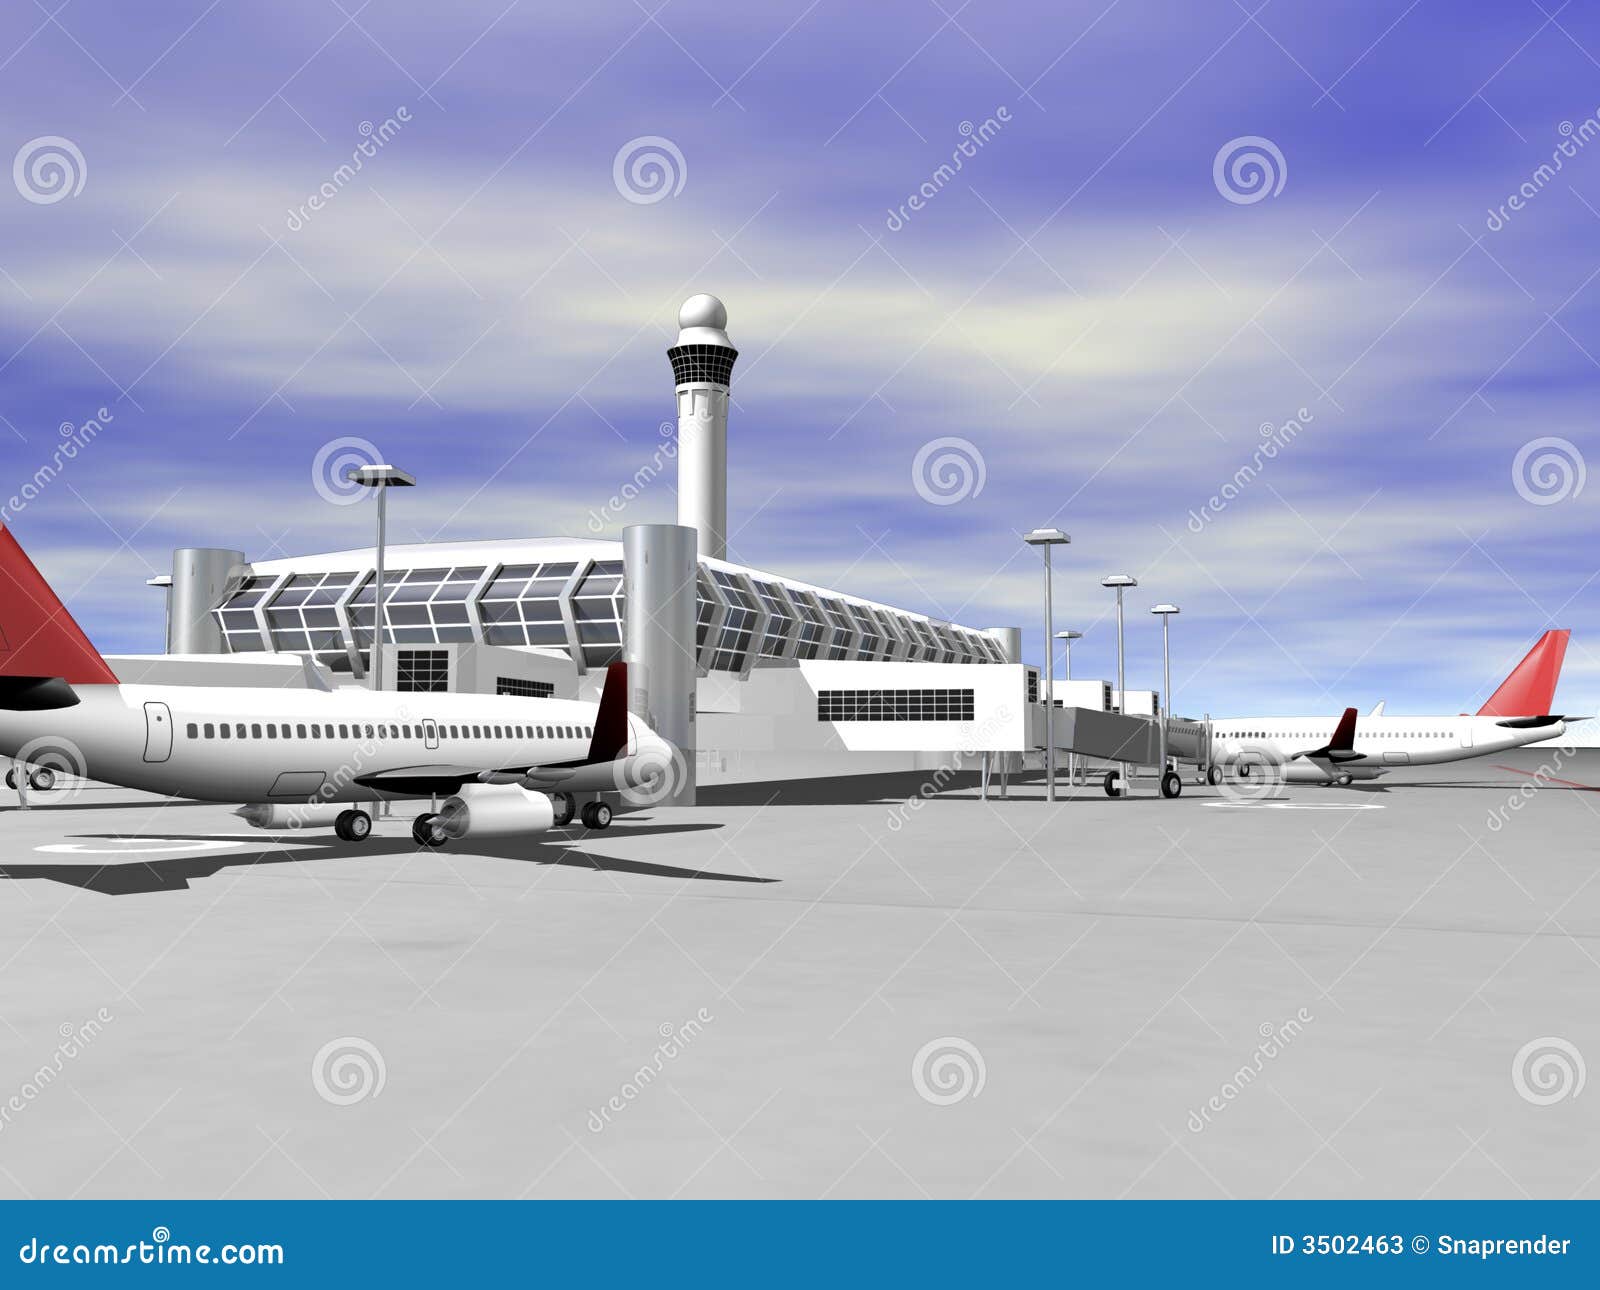 clipart of airport - photo #44